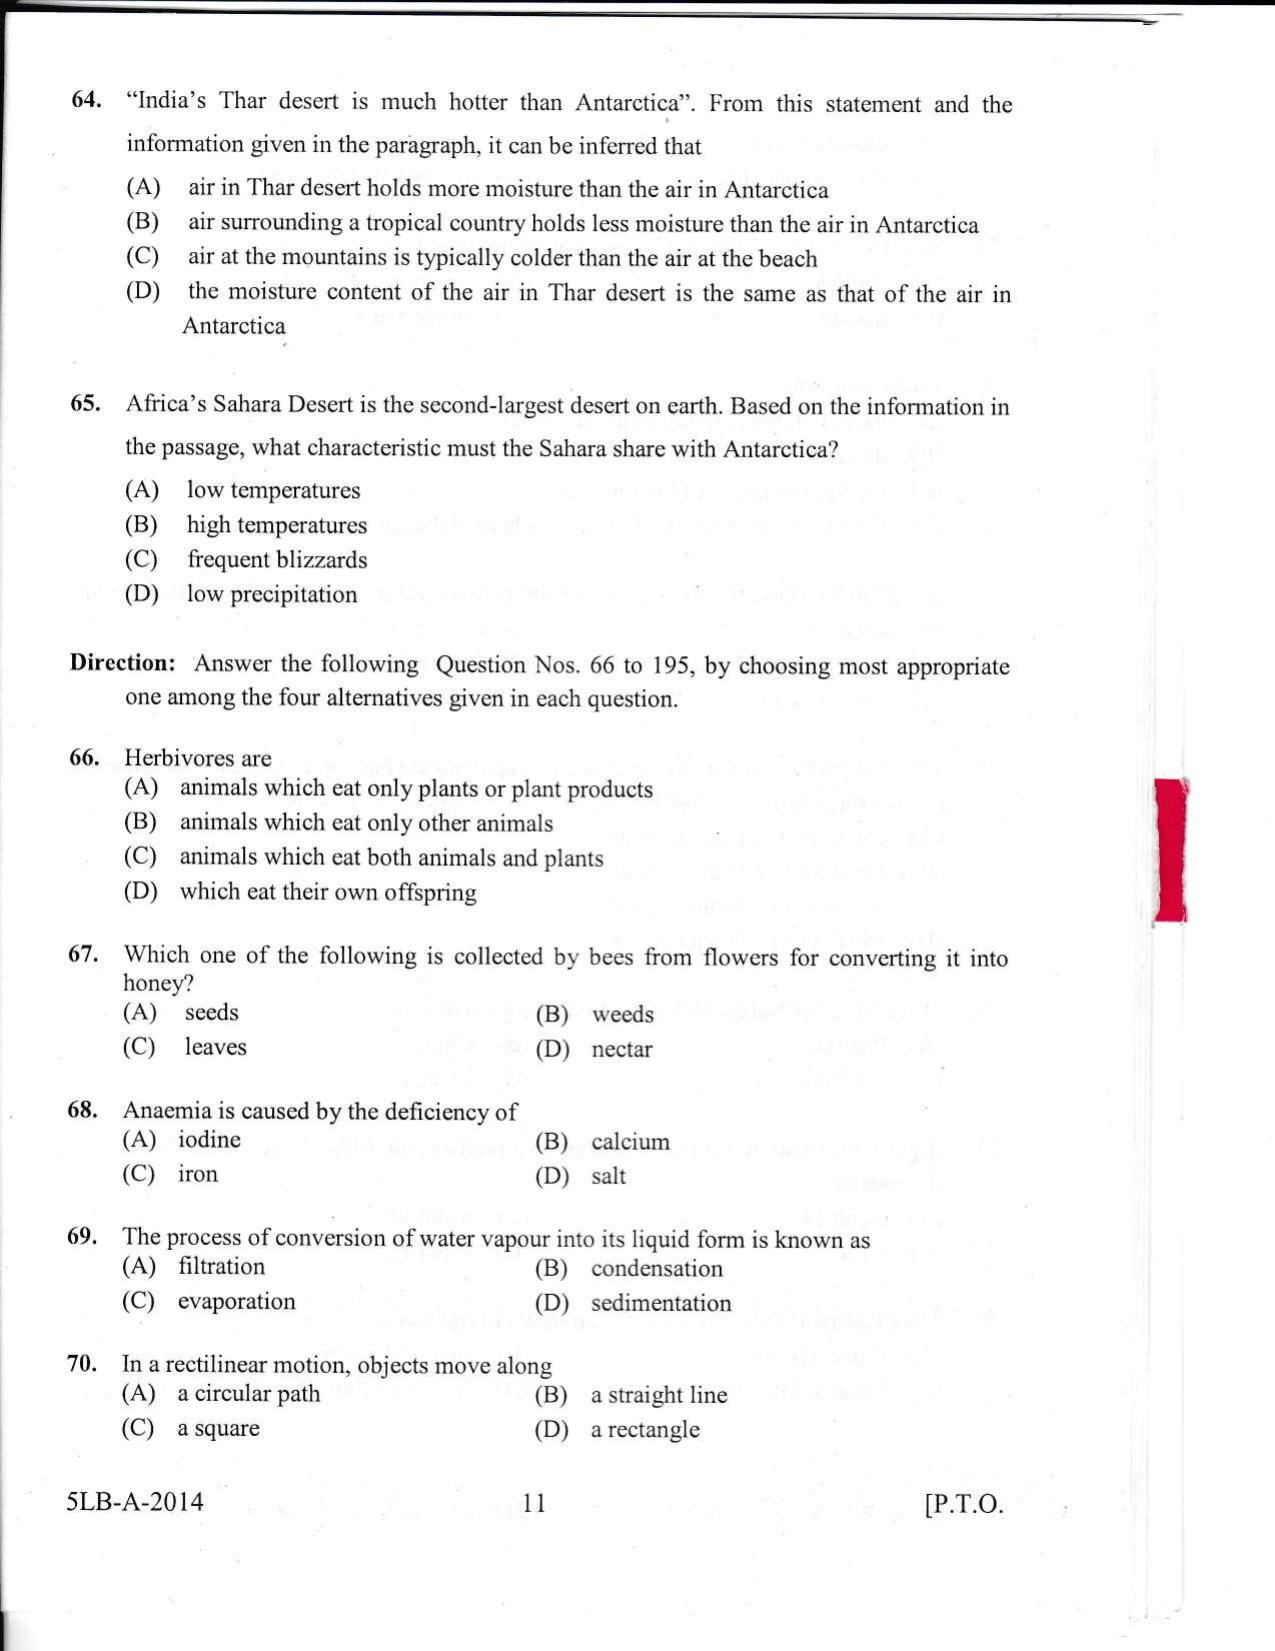 KLEE 5 Year LLB Exam 2014 Question Paper - Page 11